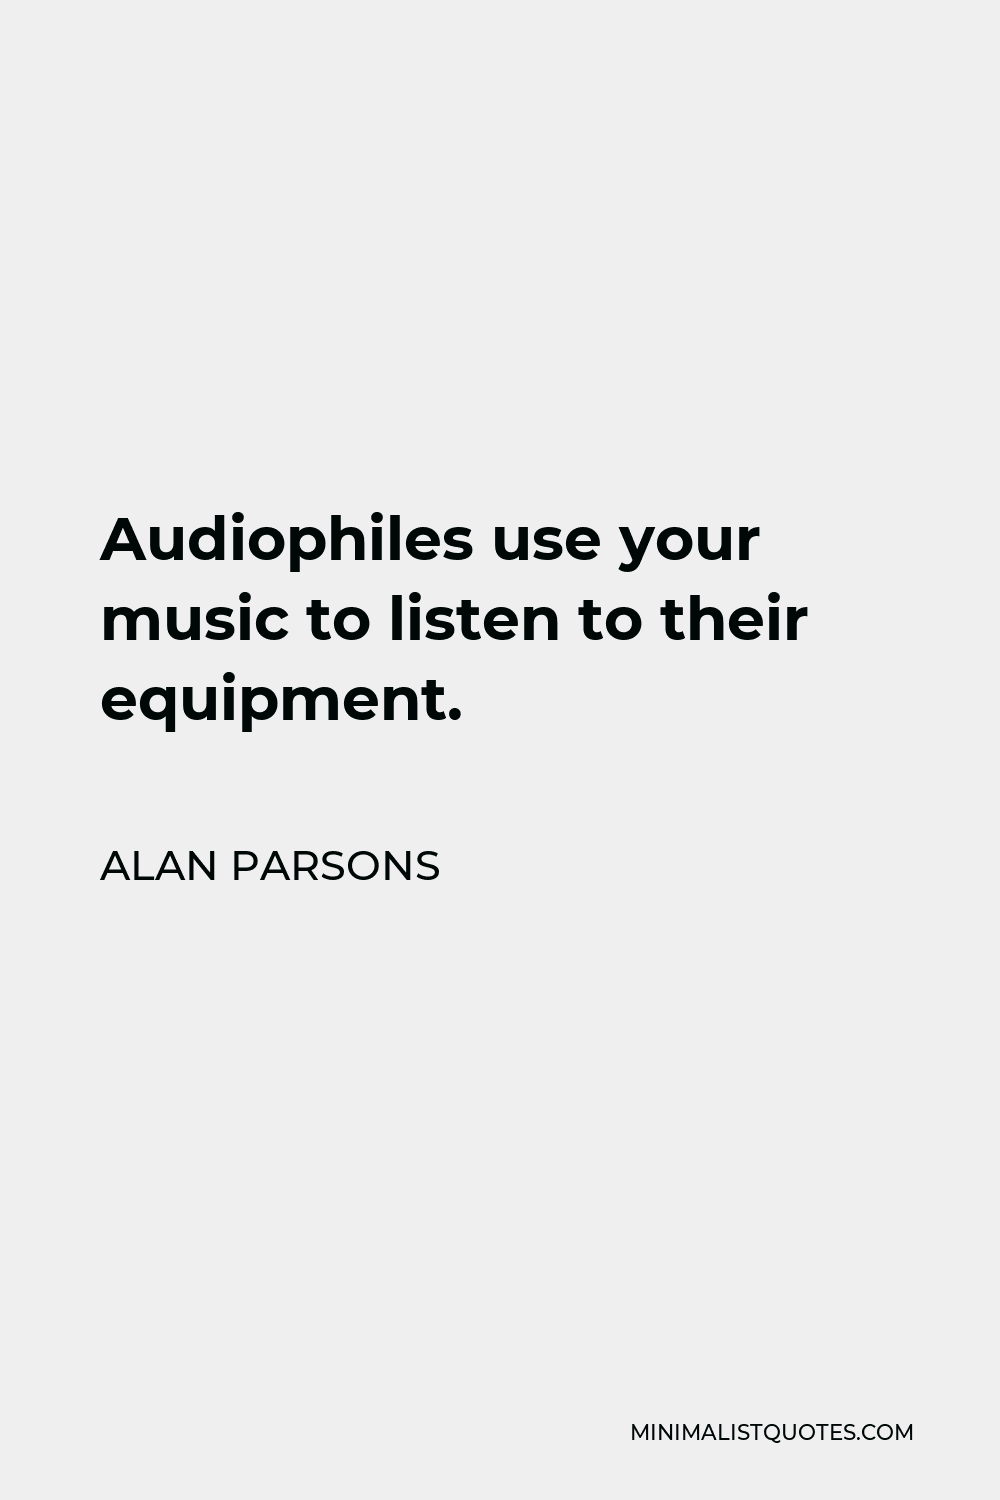 Alan Parsons Quote - Audiophiles use your music to listen to their equipment.